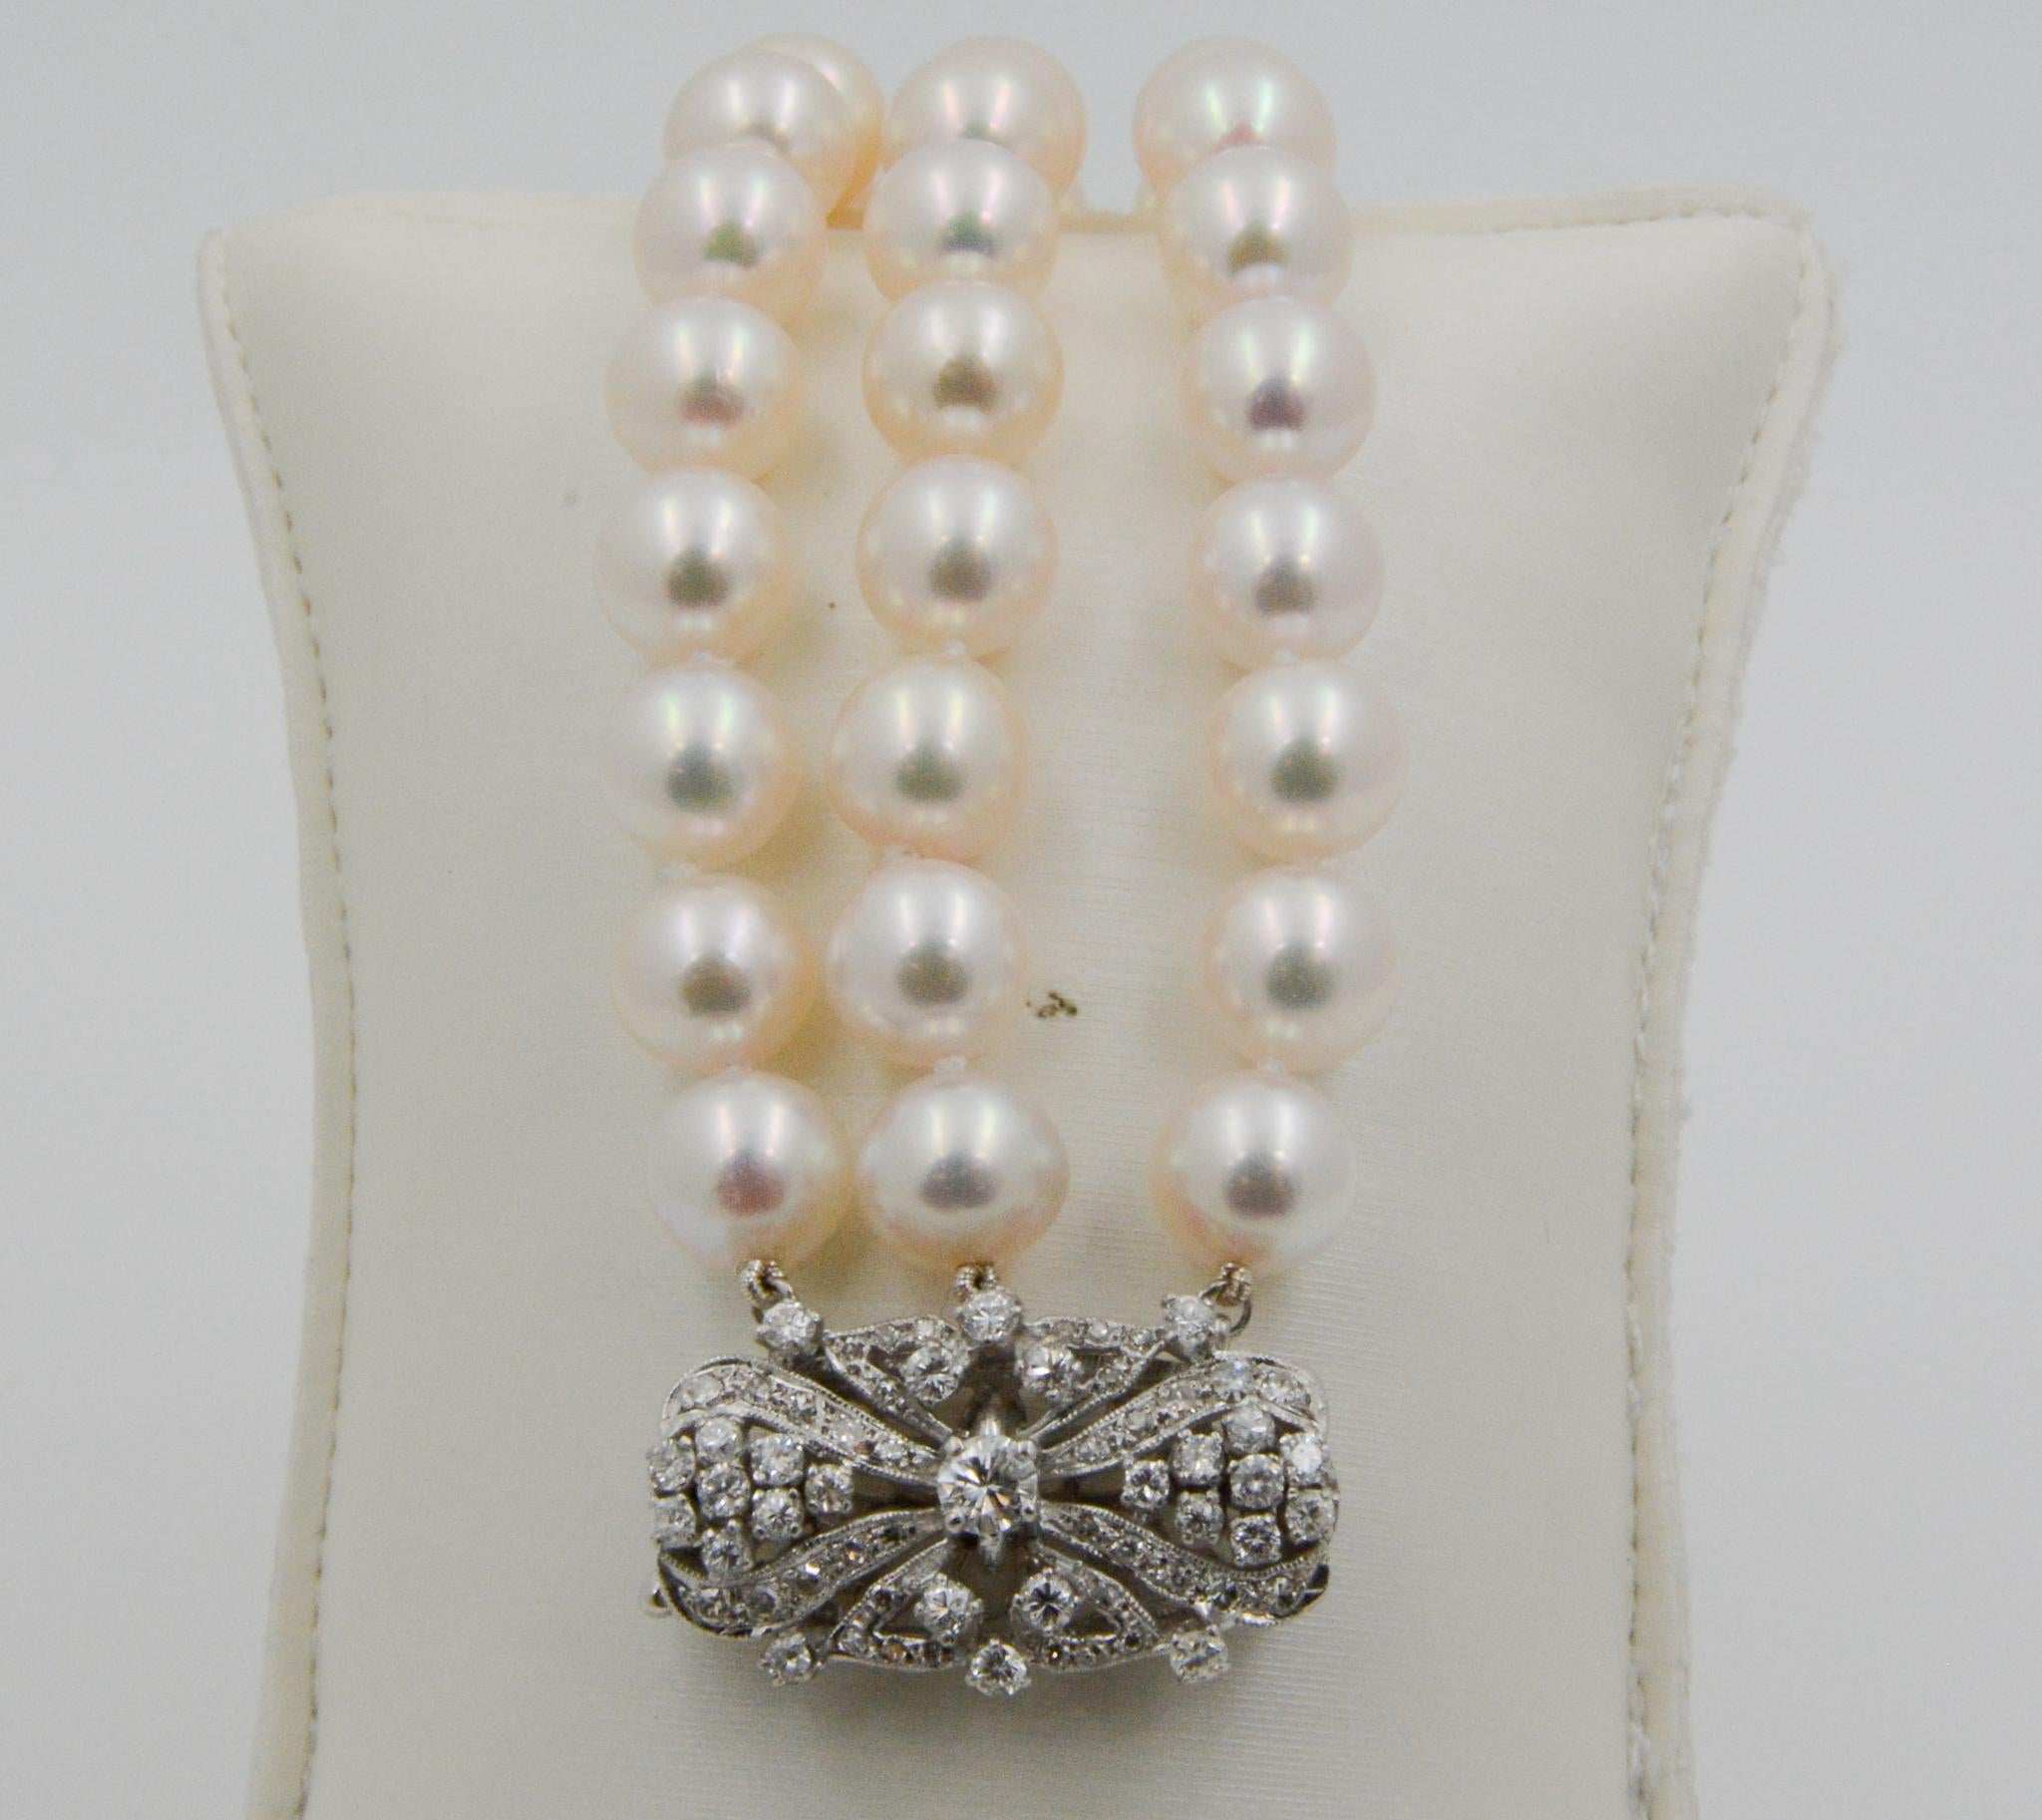 57 white cultured pearls, measuring 8x8.85mm each, are strung on three rows of this lovely bracelet. The intricate 18 karat white gold oval clasp features 27 round brilliant cut diamonds, weighing a combined 0.60 carats with H-I coloring and SI